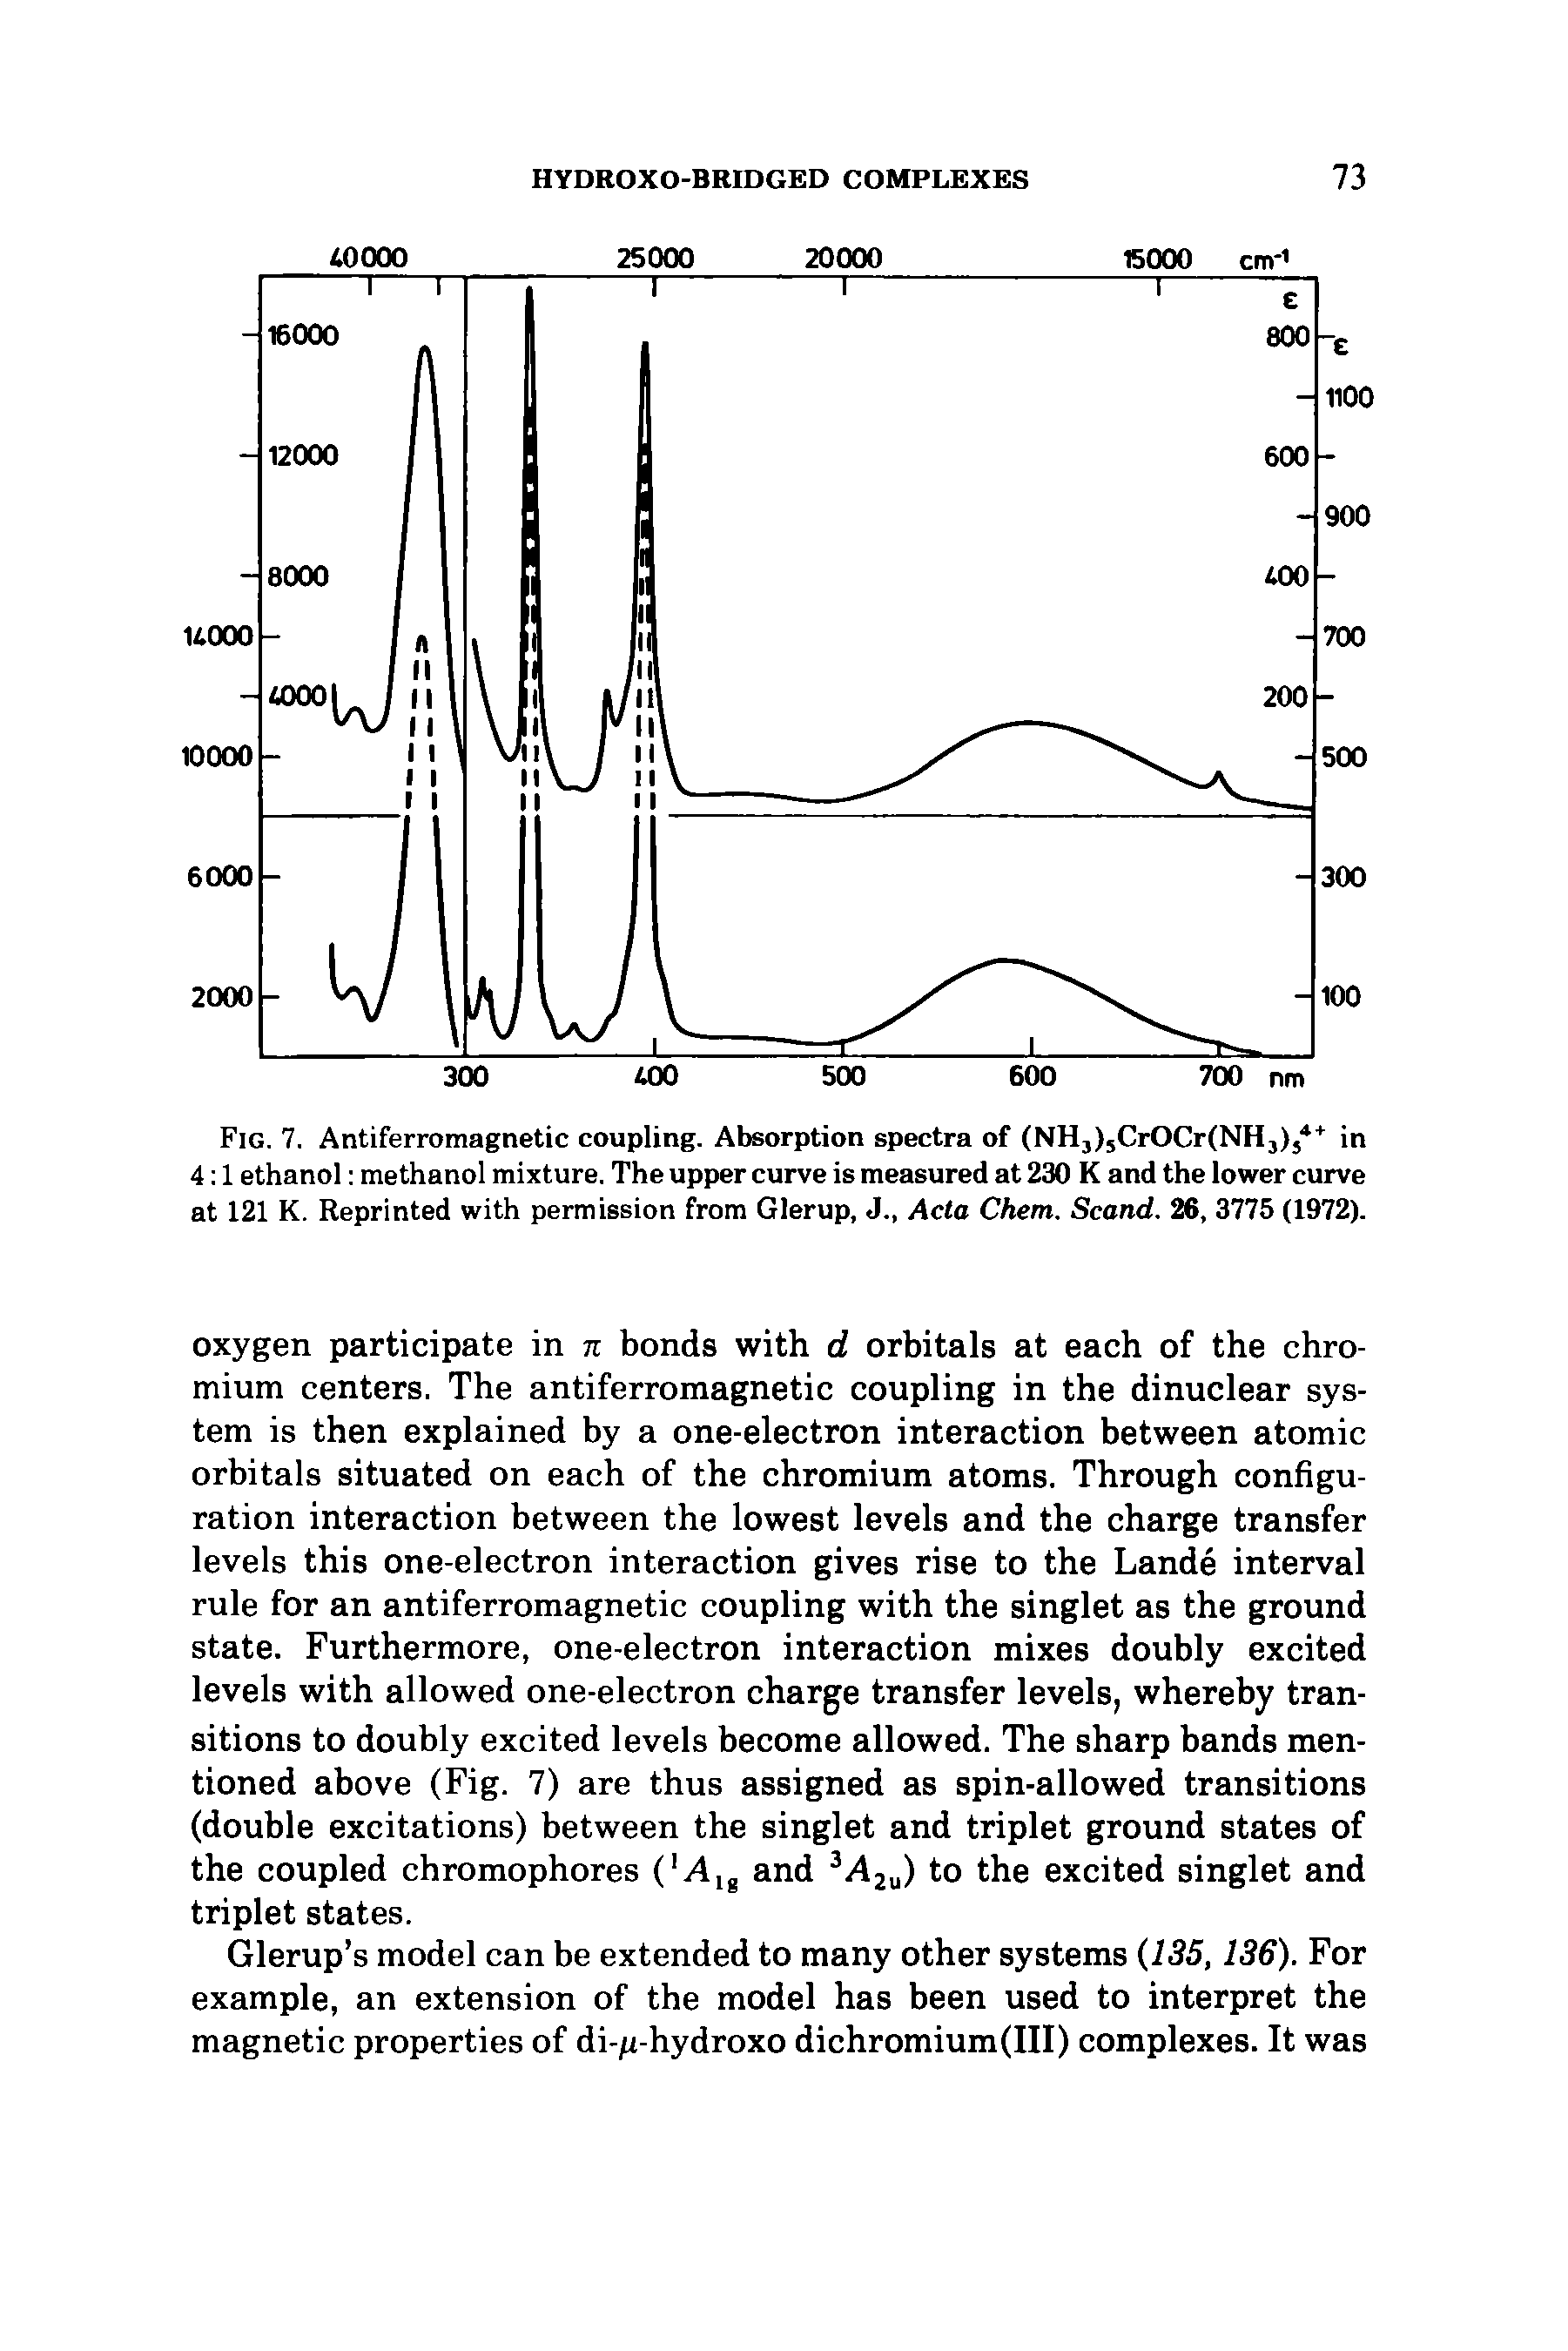 Fig. 7. Antiferromagnetic coupling. Absorption spectra of (NHj CrOCrfNHj),4 in 4 1 ethanol methanol mixture. The upper curve is measured at 230 K and the lower curve at 121 K. Reprinted with permission from Glerup, J., Acta Chem. Scand. 26, 3775 (1972).